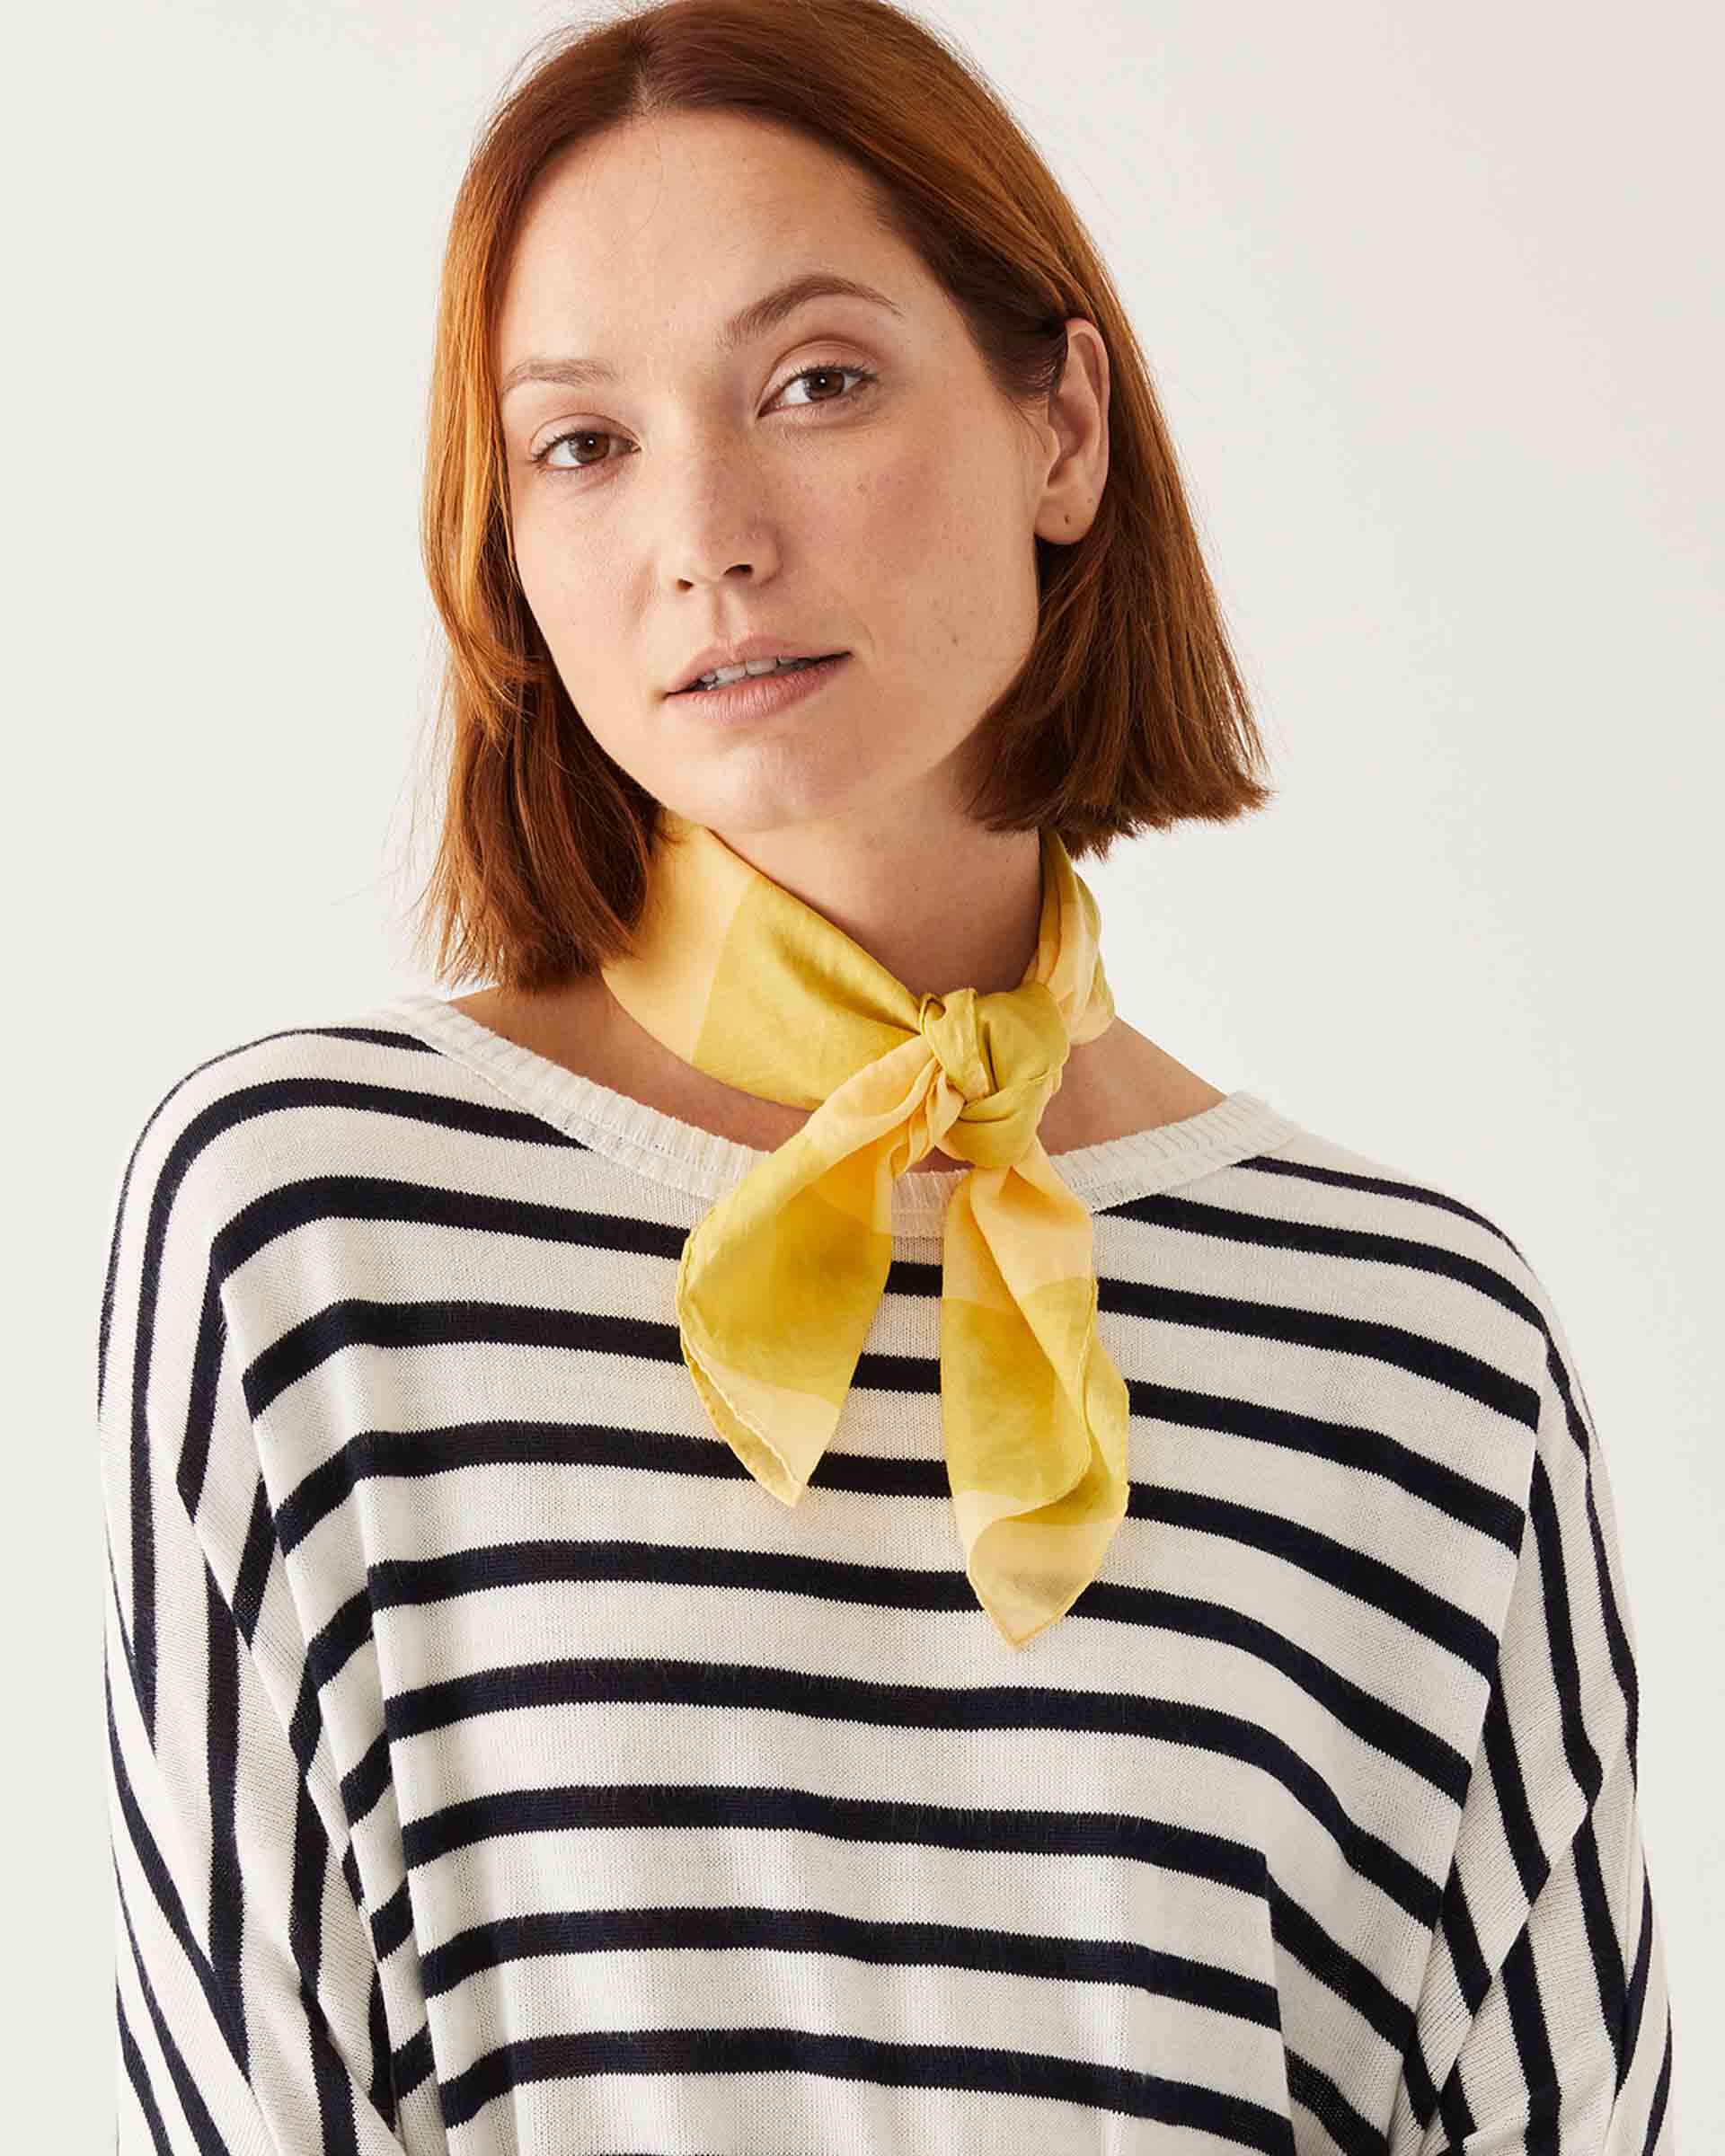 female wearing striped sweater with a yellow striped scarf around her neck on a white background